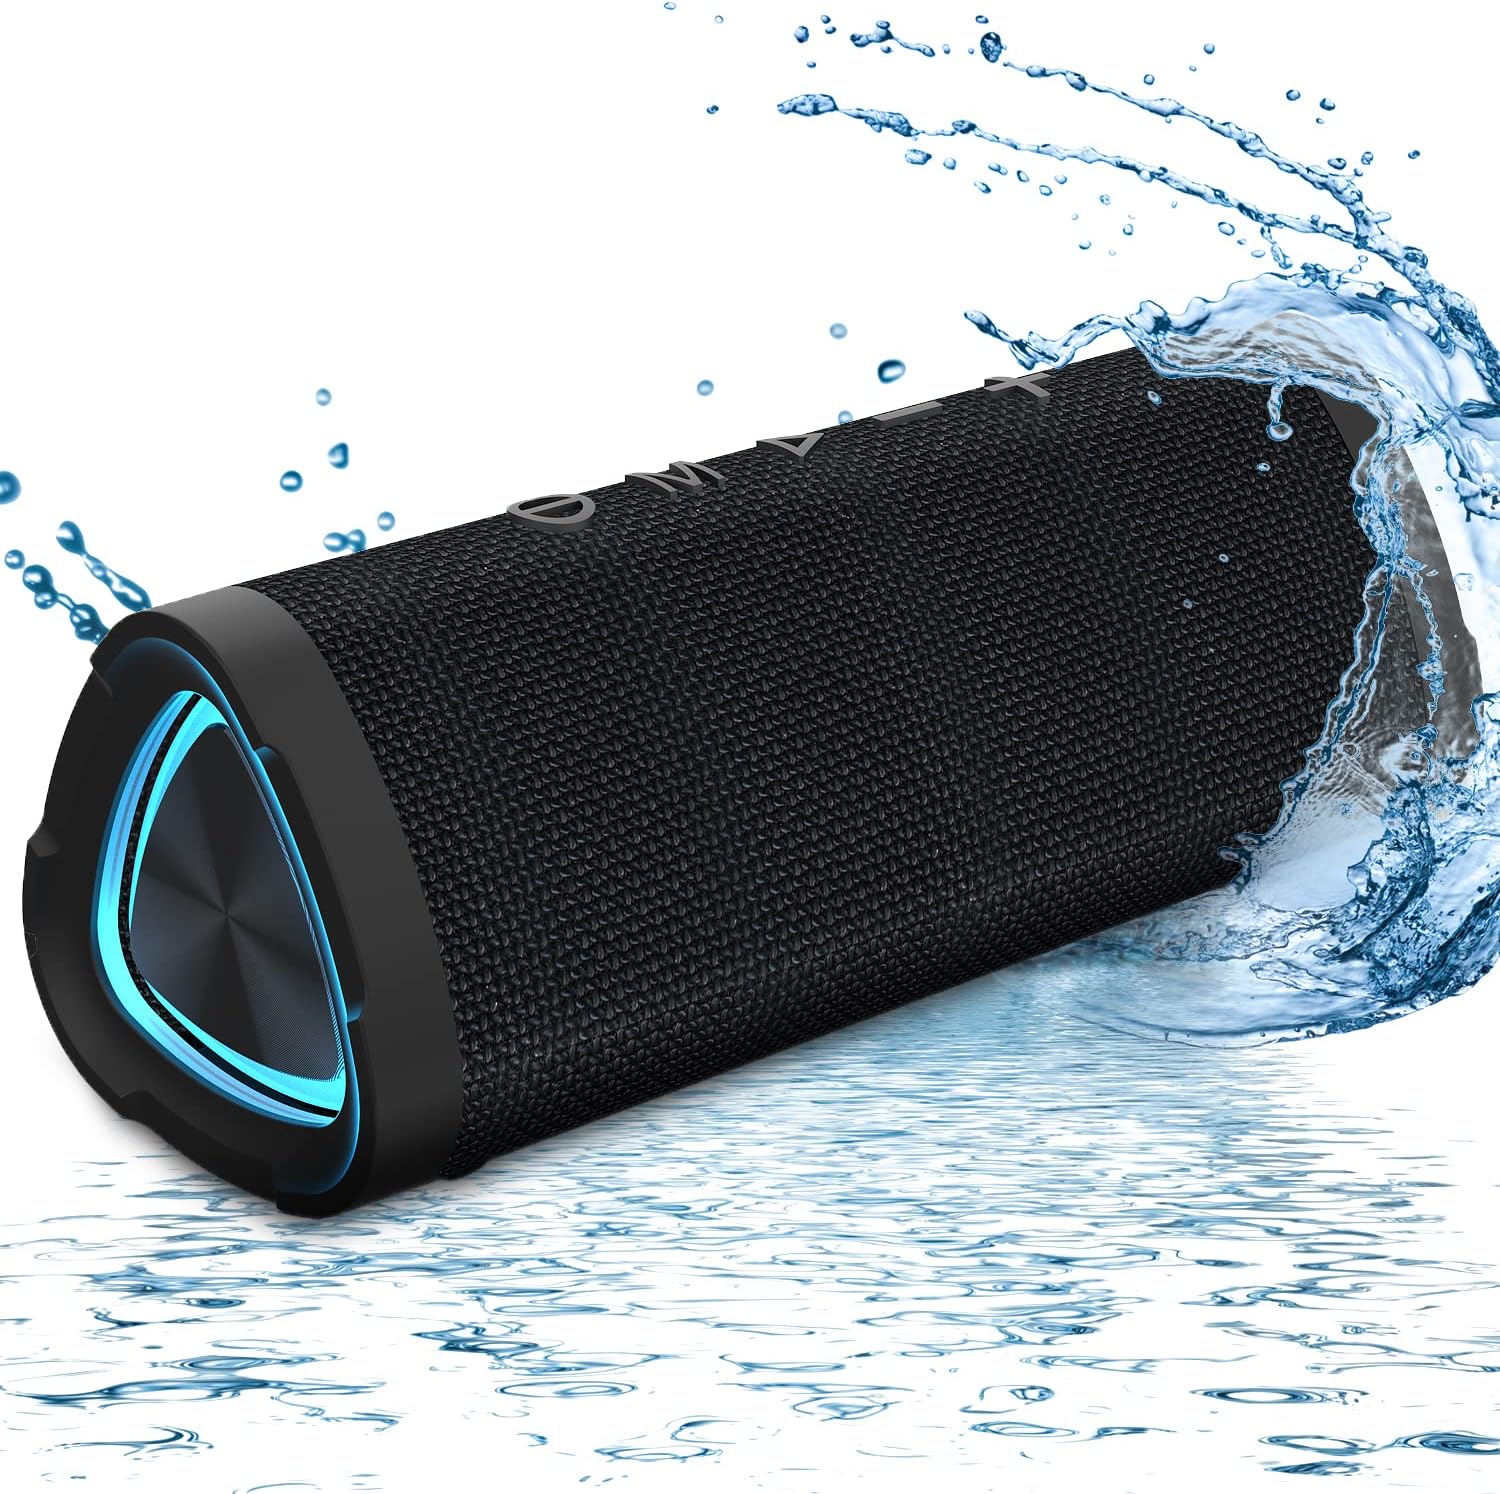 Hseok Bluetooth Speakers V40 Portable Wireless Speaker V5.0 with 24W Loud Stereo Sound, TWS, 24H Playtime & IPX7 Waterproof, Suitable for Travel, Home&Outdoors